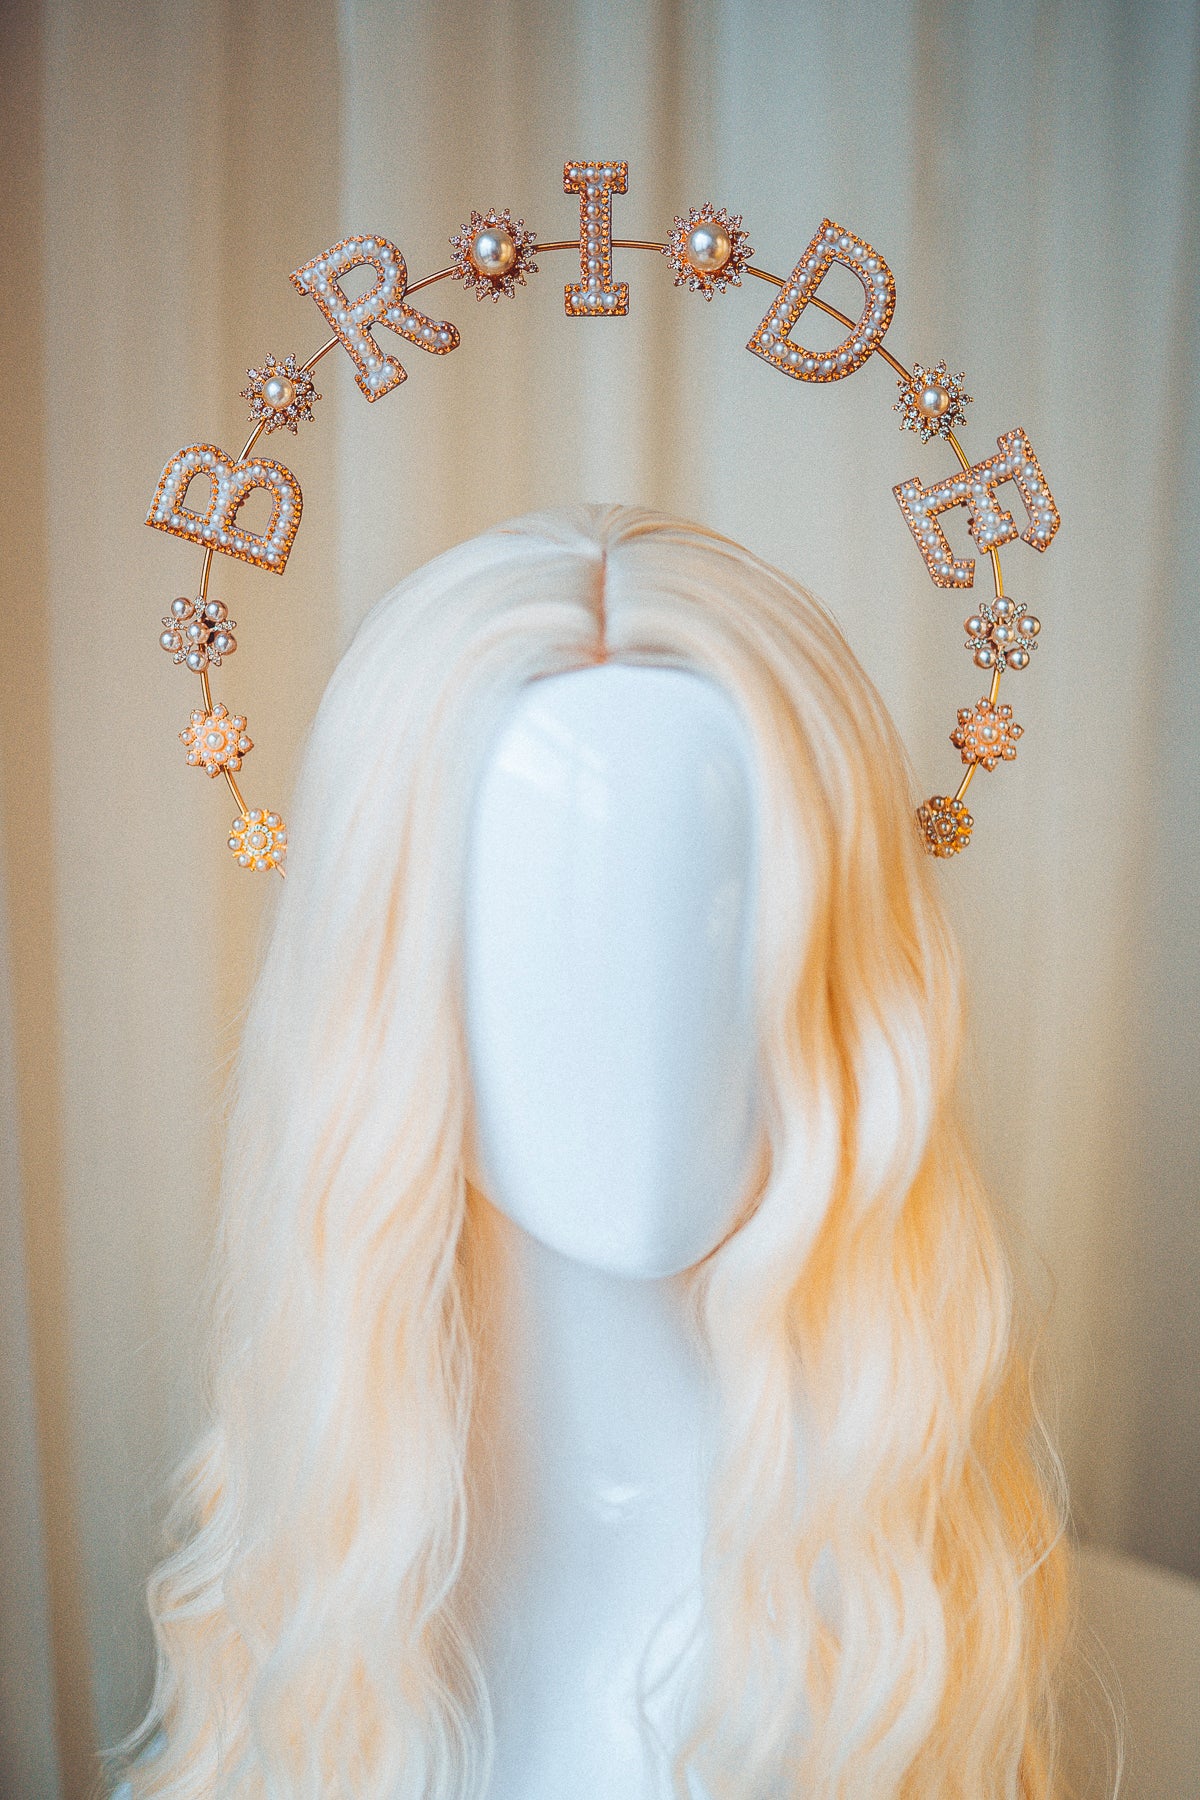 Bride To Be Halo Crown